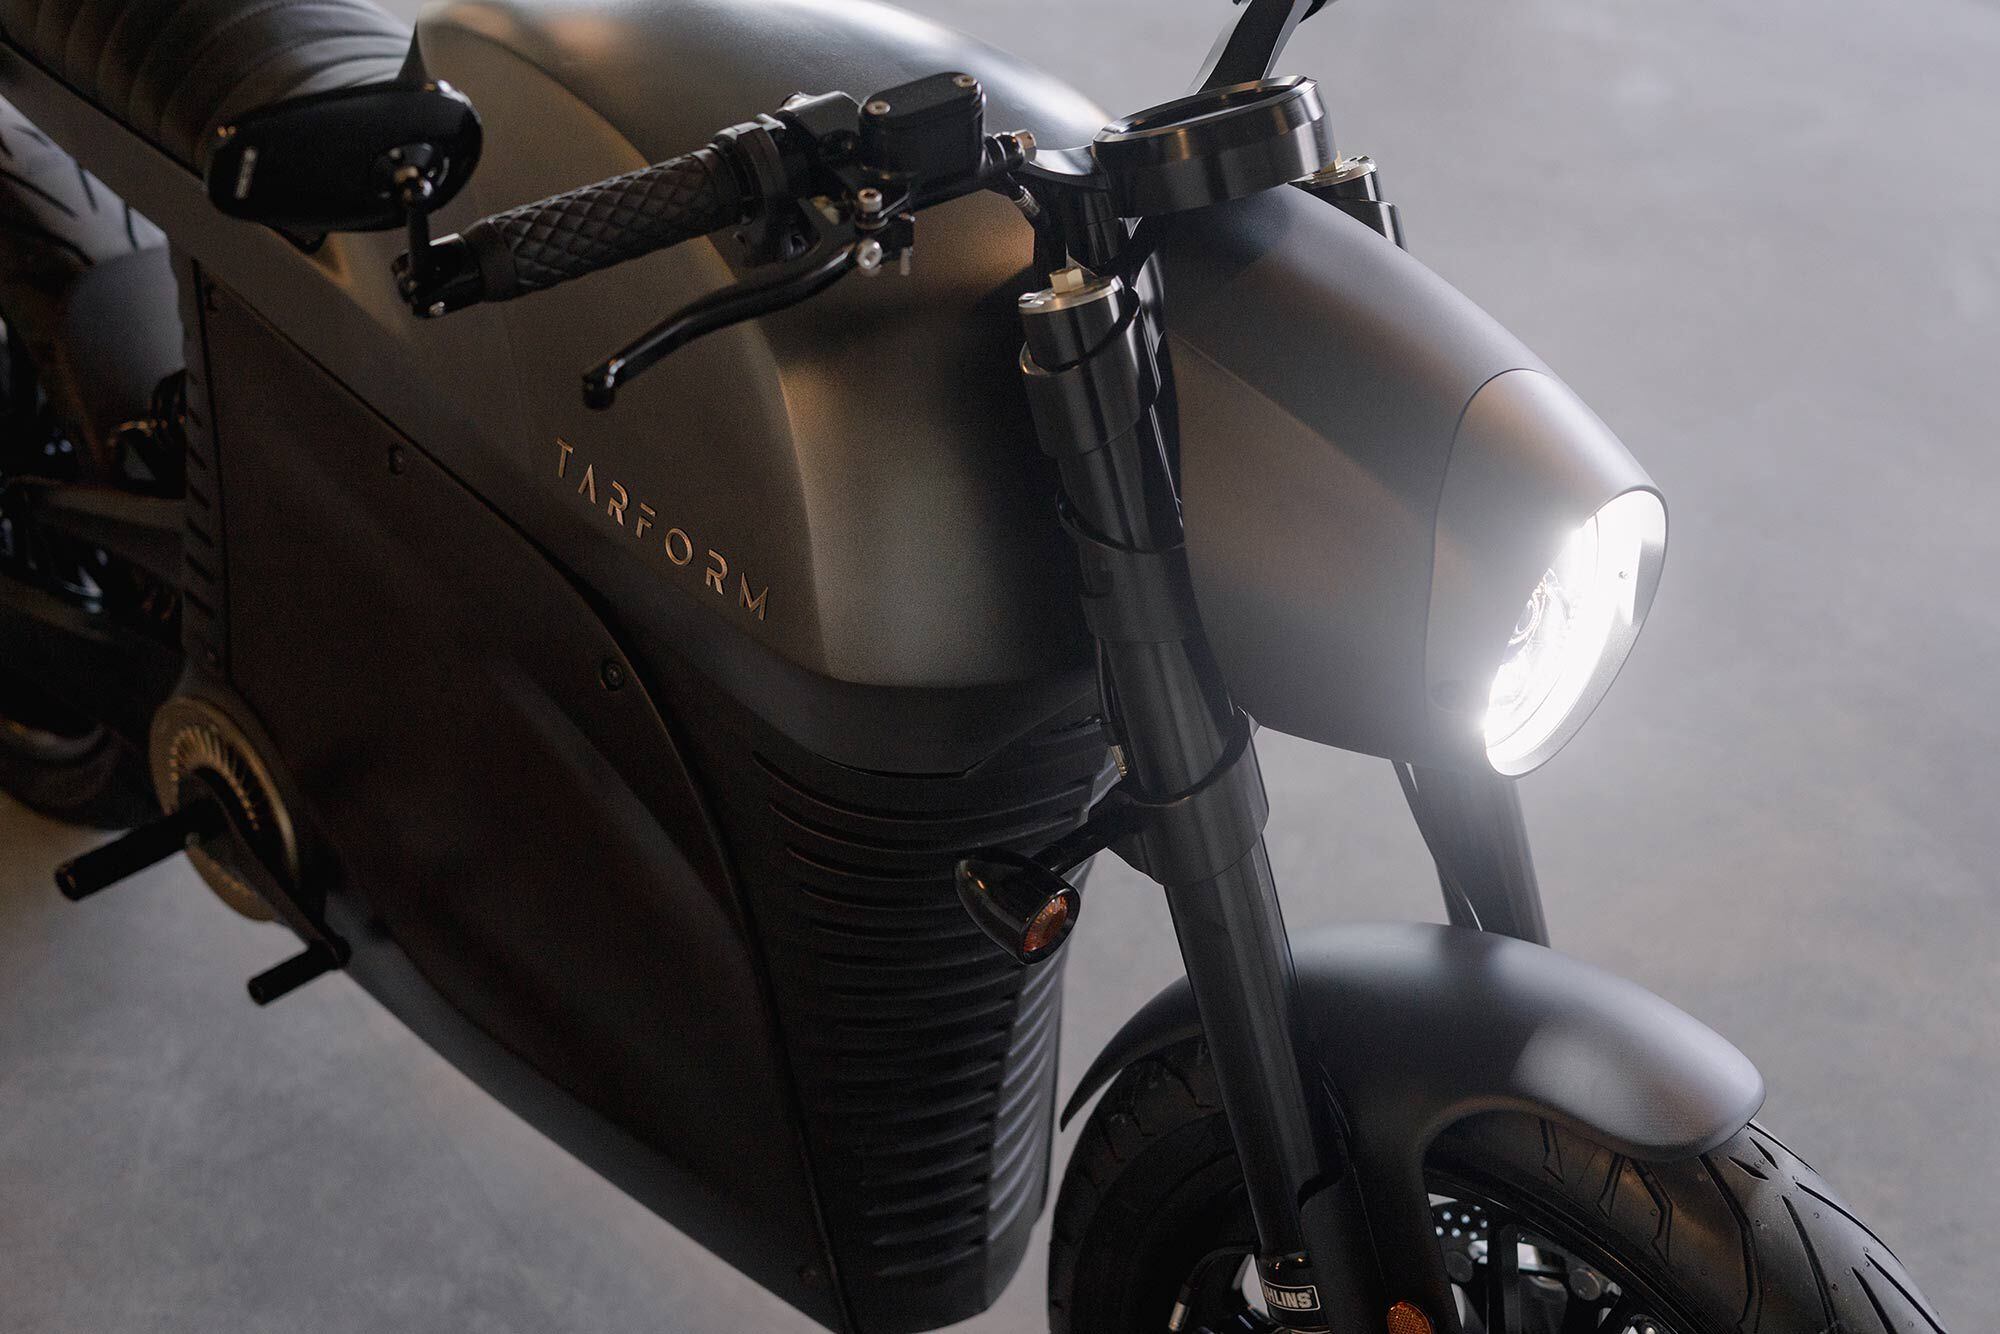 The Racer’s sleek fairing-like headlight bucket and black-out bits (and street-biased tires) distinguish it from the Scrambler model.